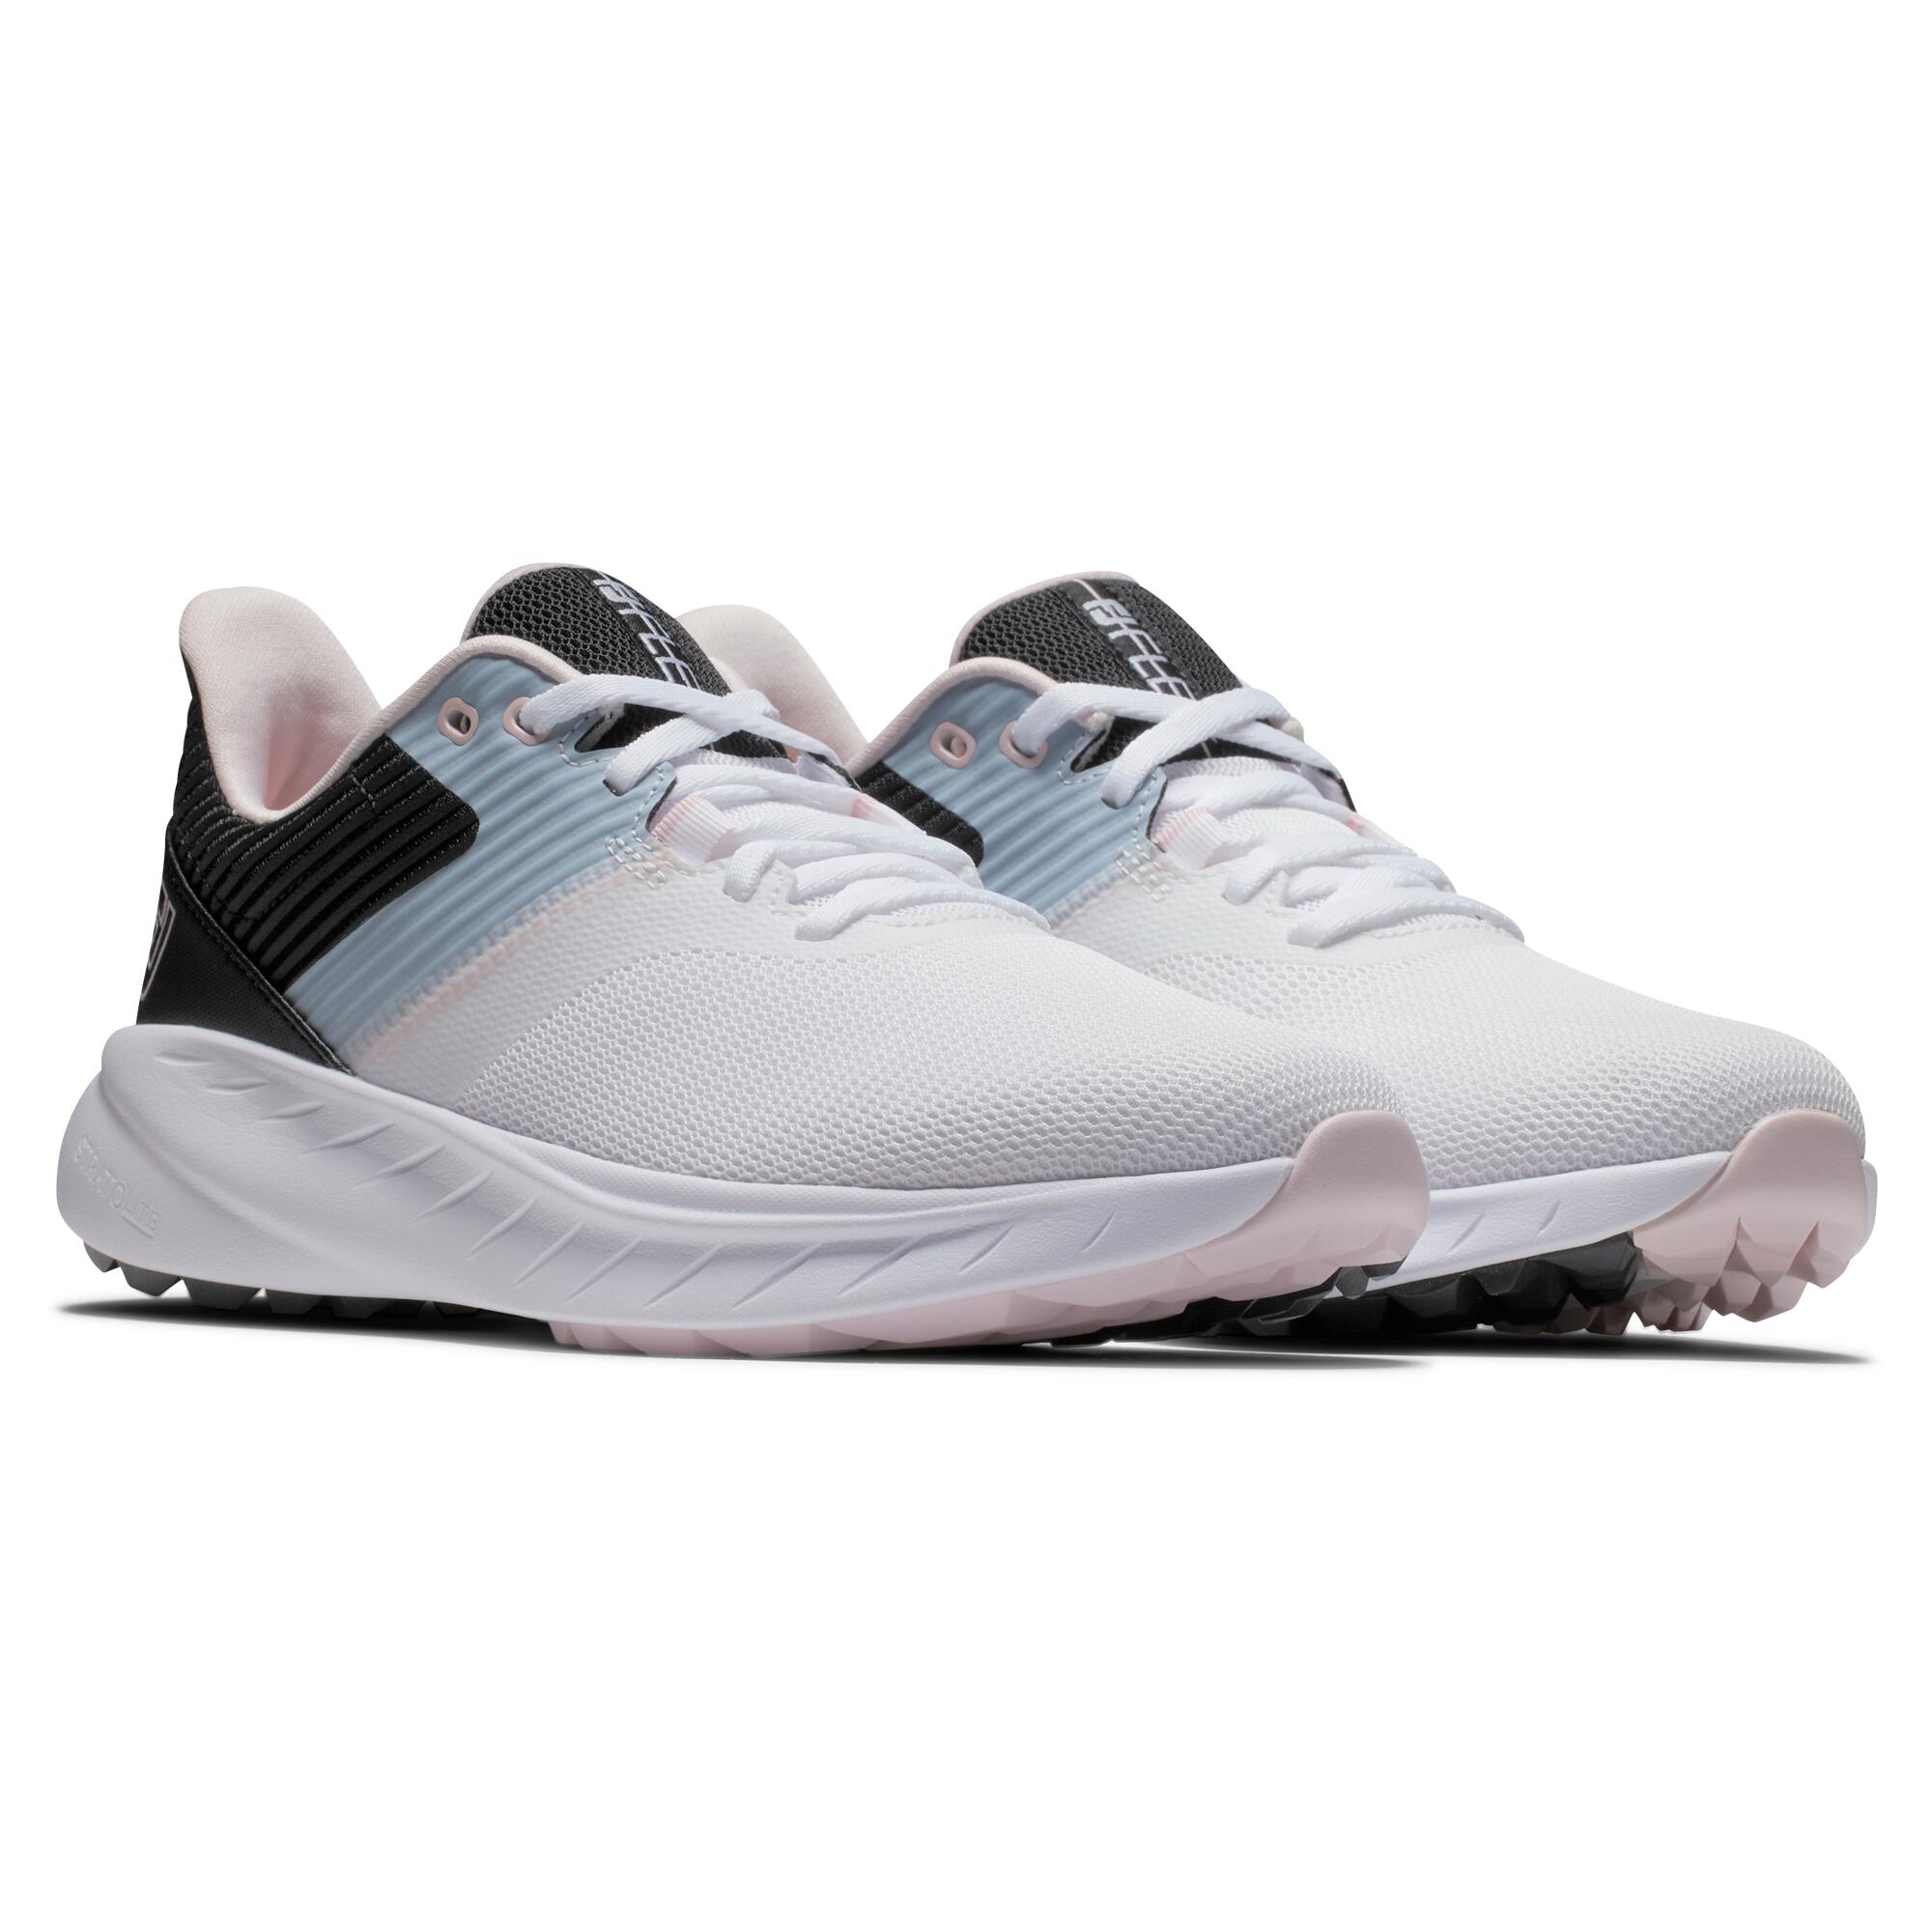 women's golf shoes breathable FOOTJOY FLEX - white and black 6/6